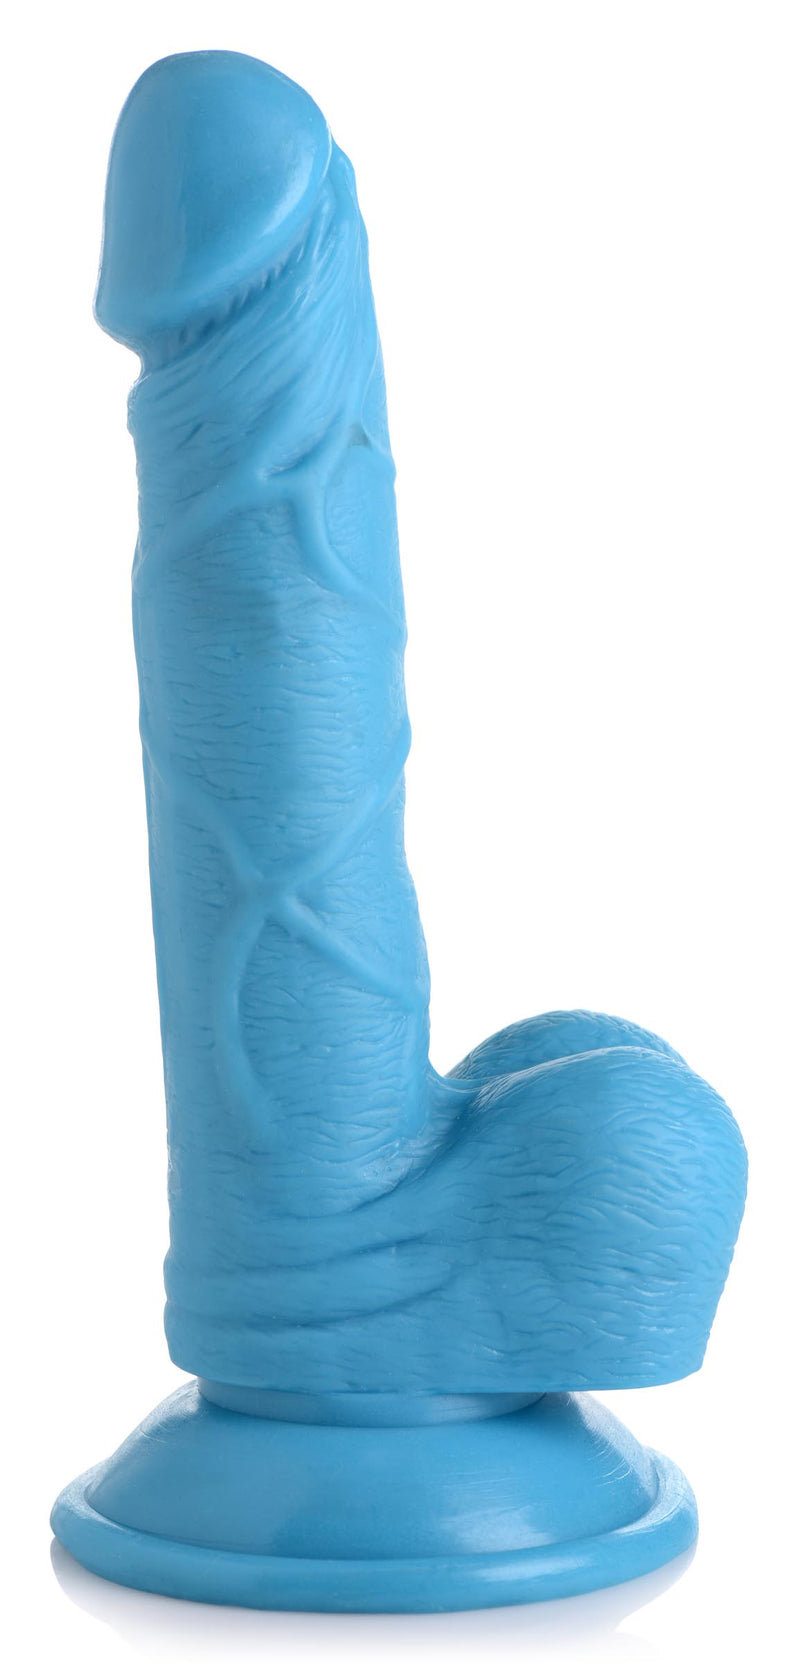 6.5 Inch Realistic Dildo with Balls - Blue Dildos from Pop Peckers